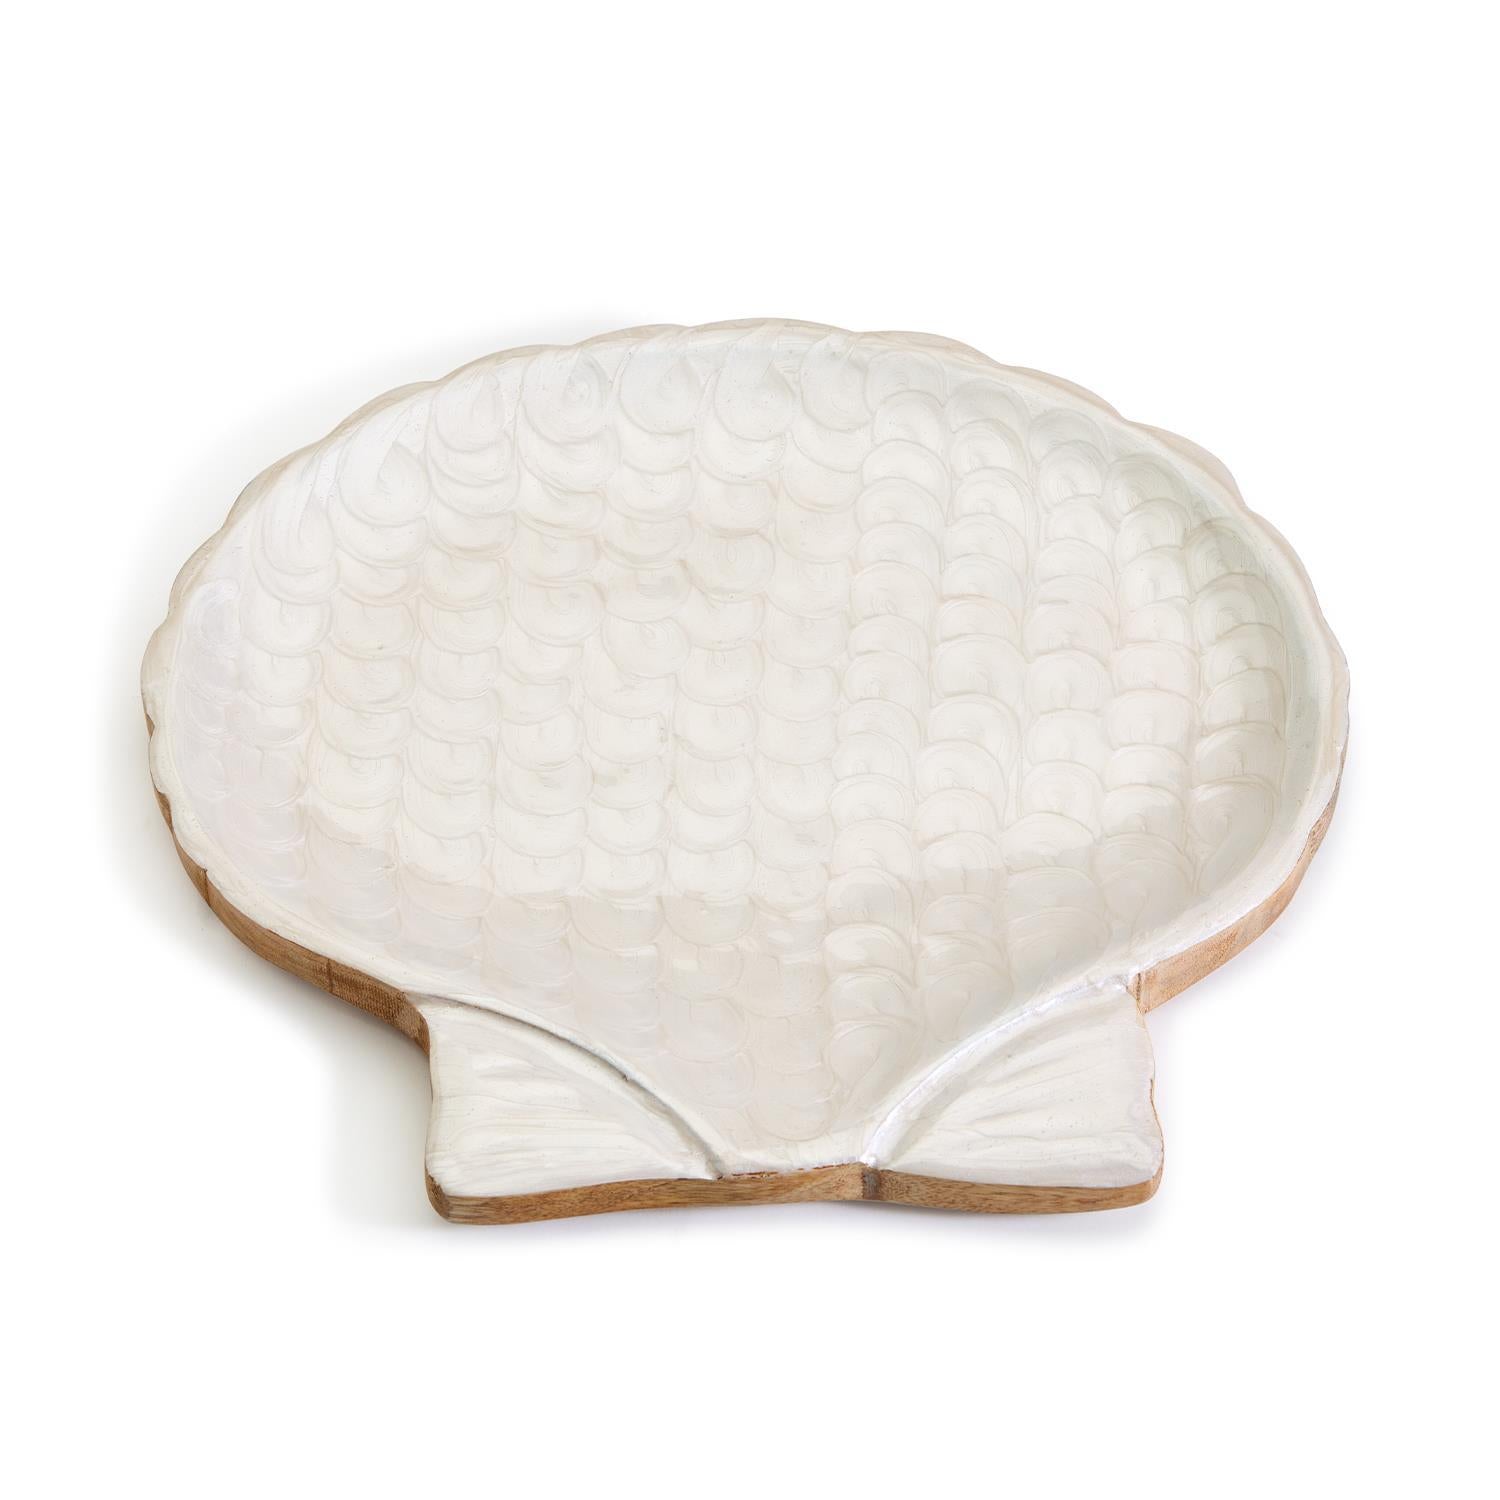 Shell Serving Tray